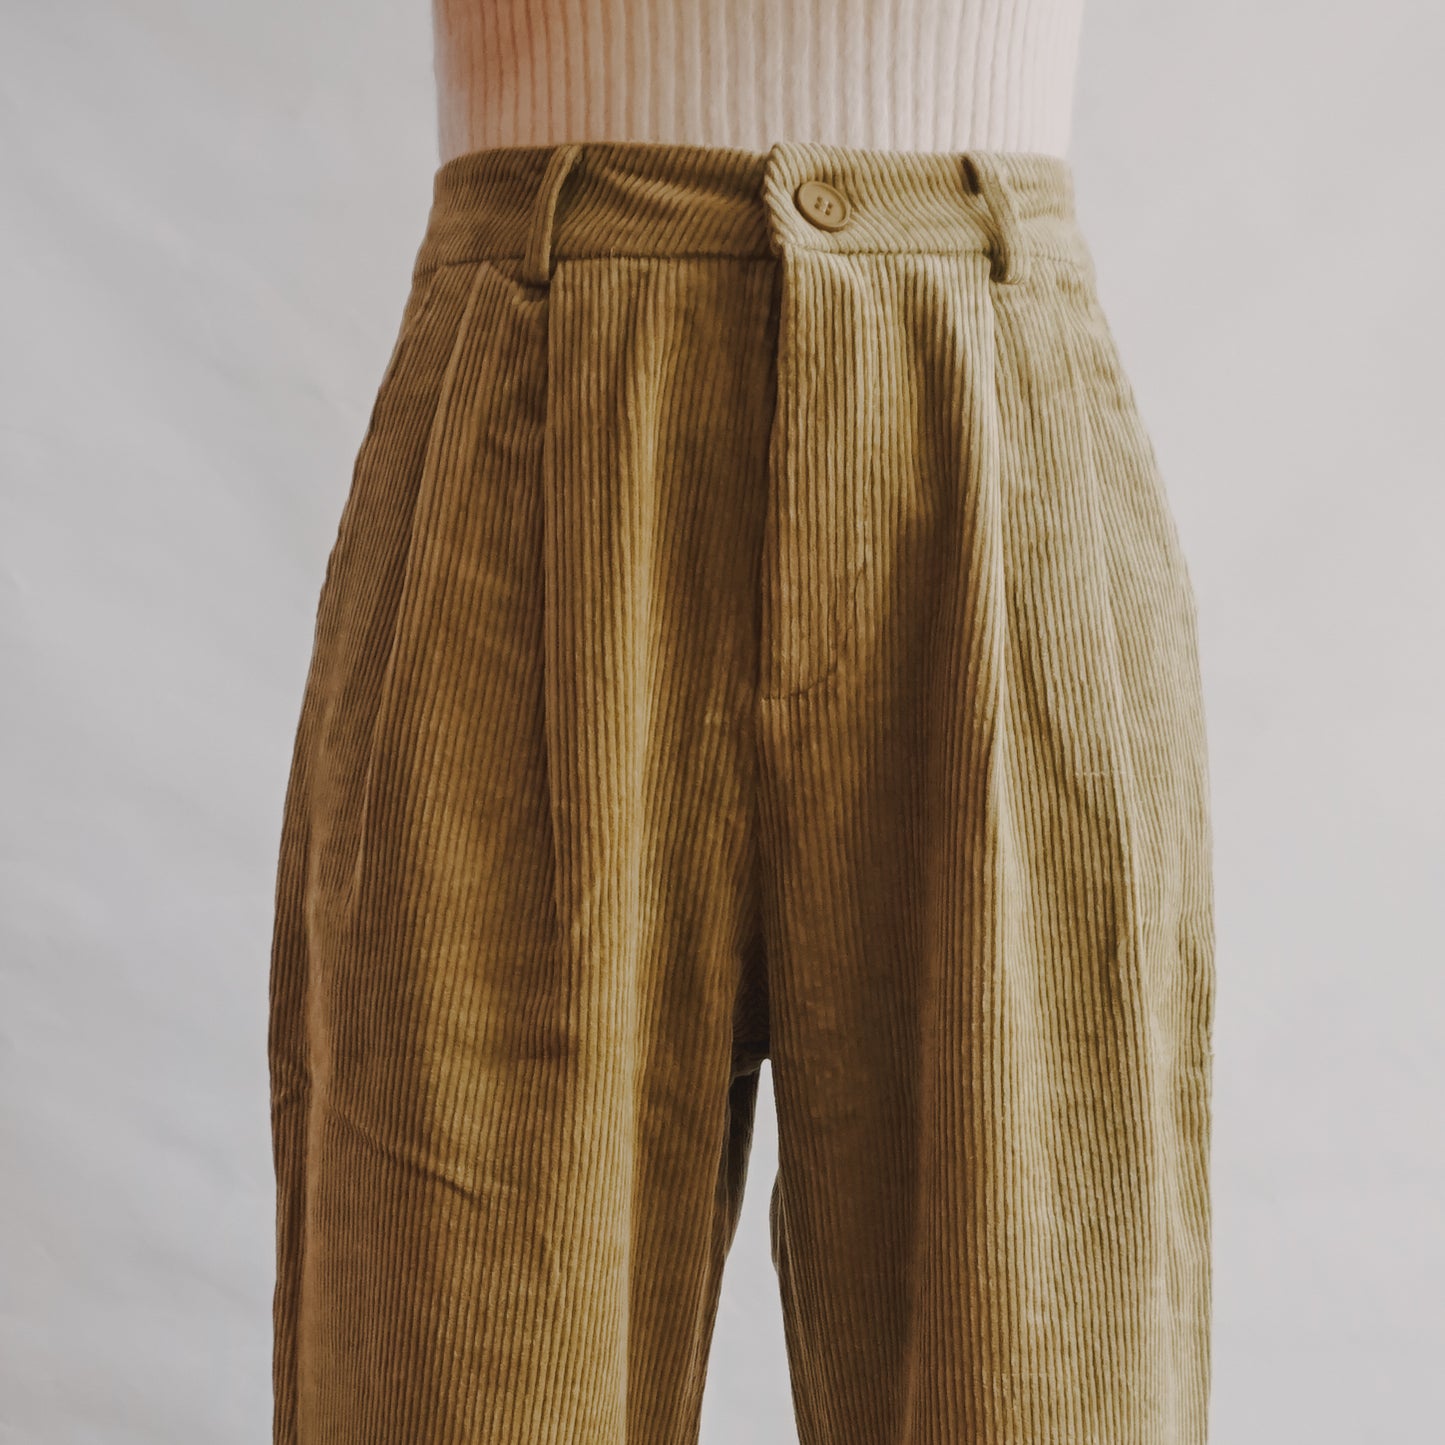 Fall Corduroy Jeans (6 Colors)